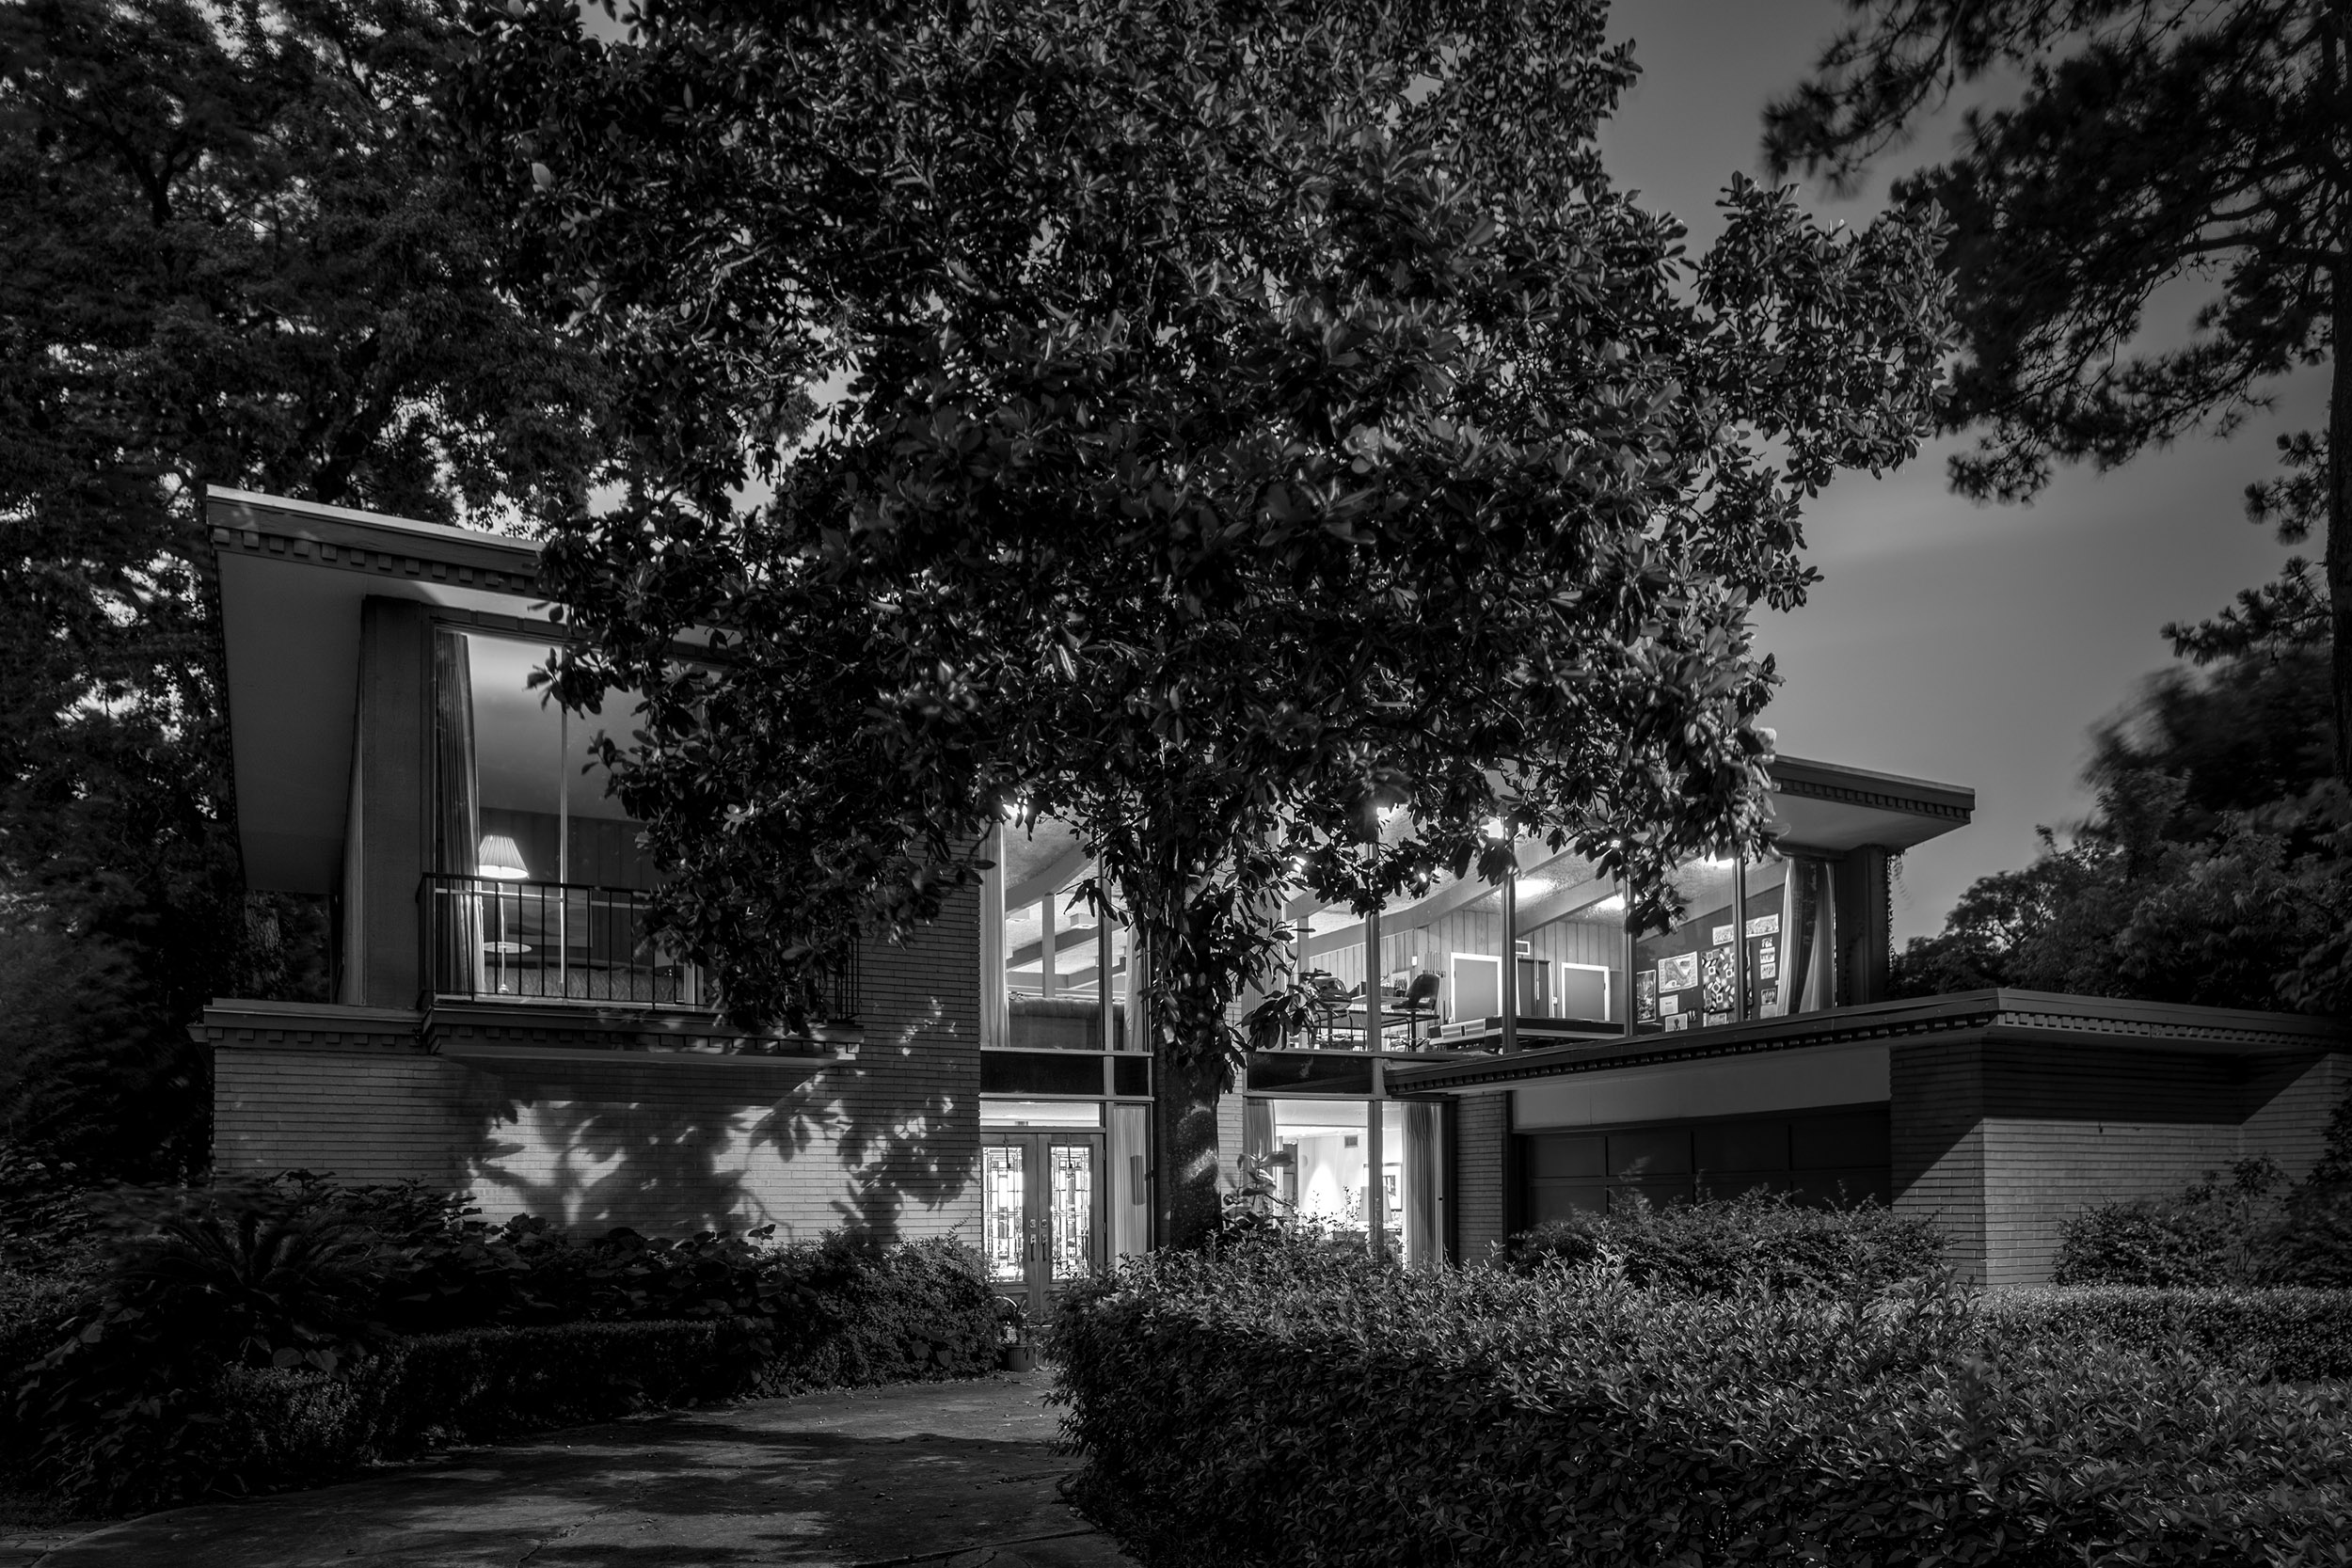 black-and-white photograph depicting a two-story midcentury modern house in Houston with tree in the foreground